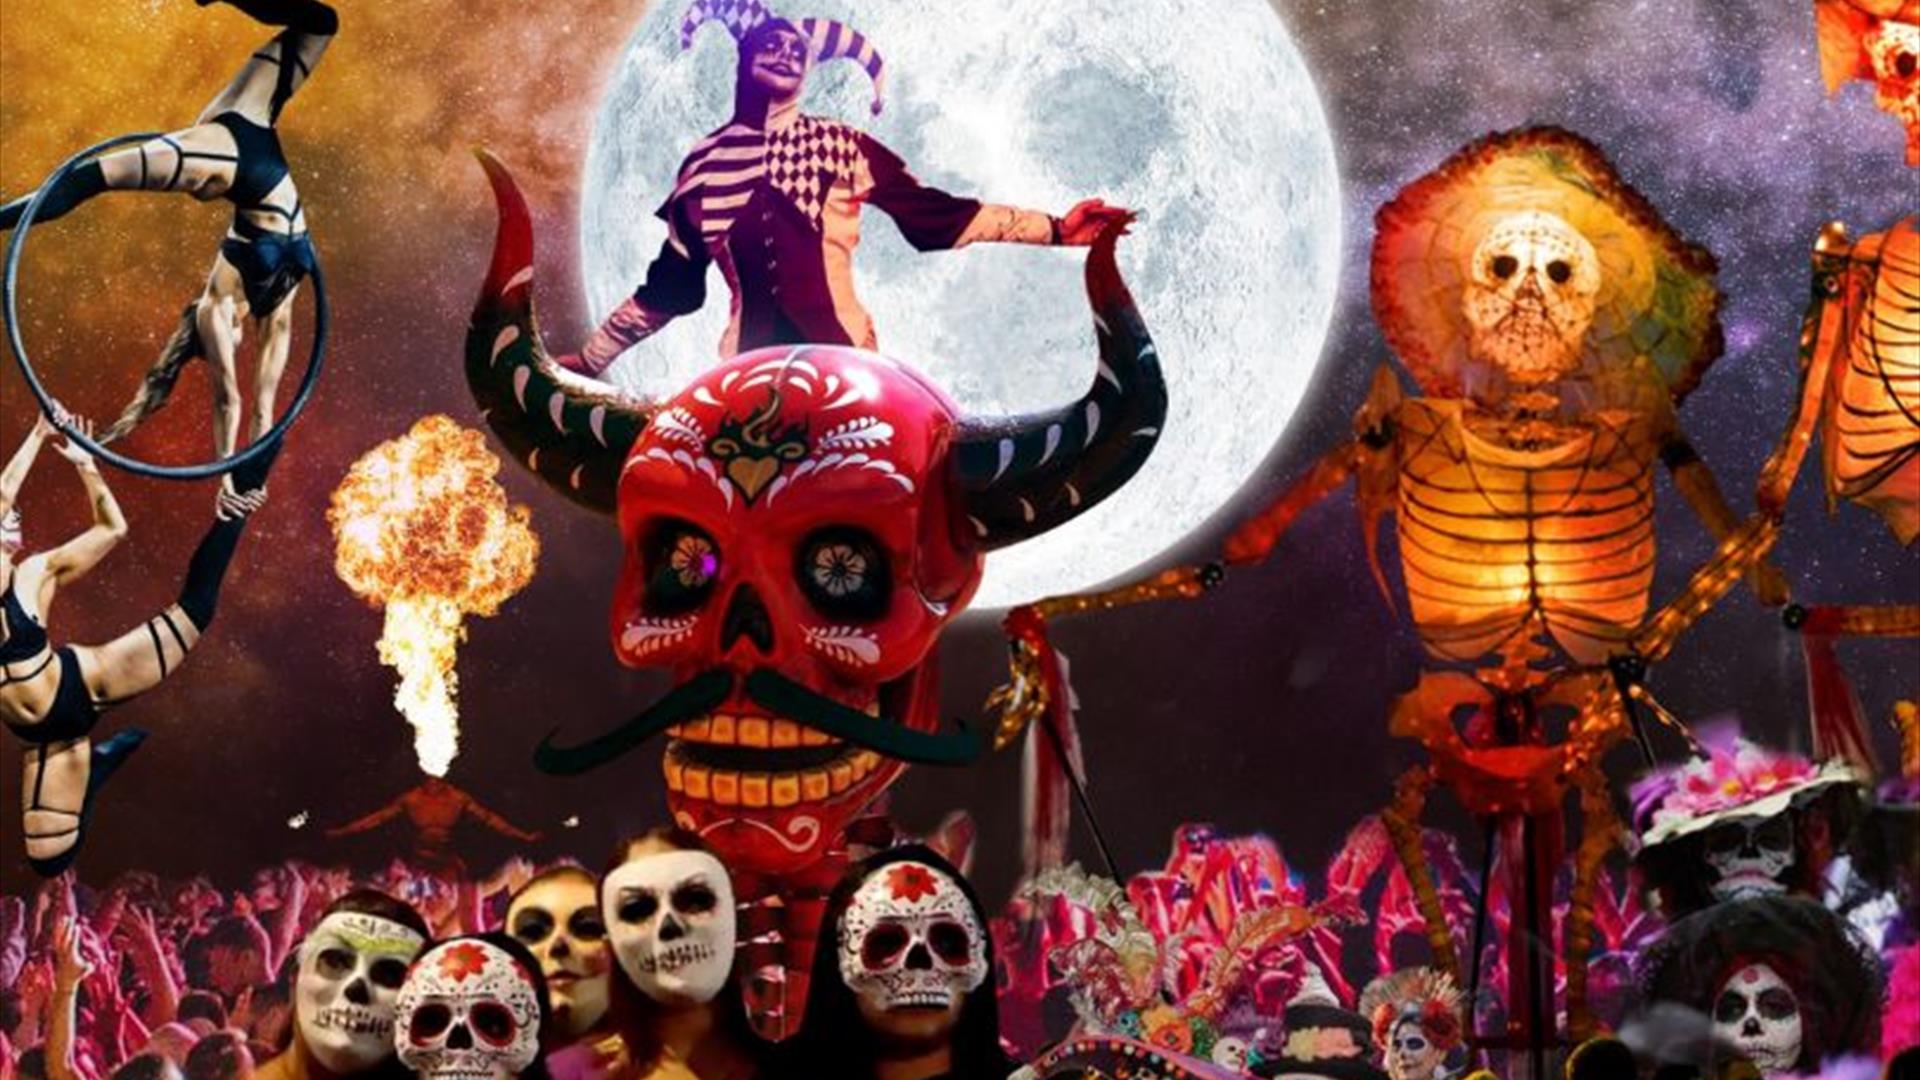 An array of performers including acrobats, and dancers wearing sugar skull masks, amongst a vast crowd with their hands in the air. Background of a st